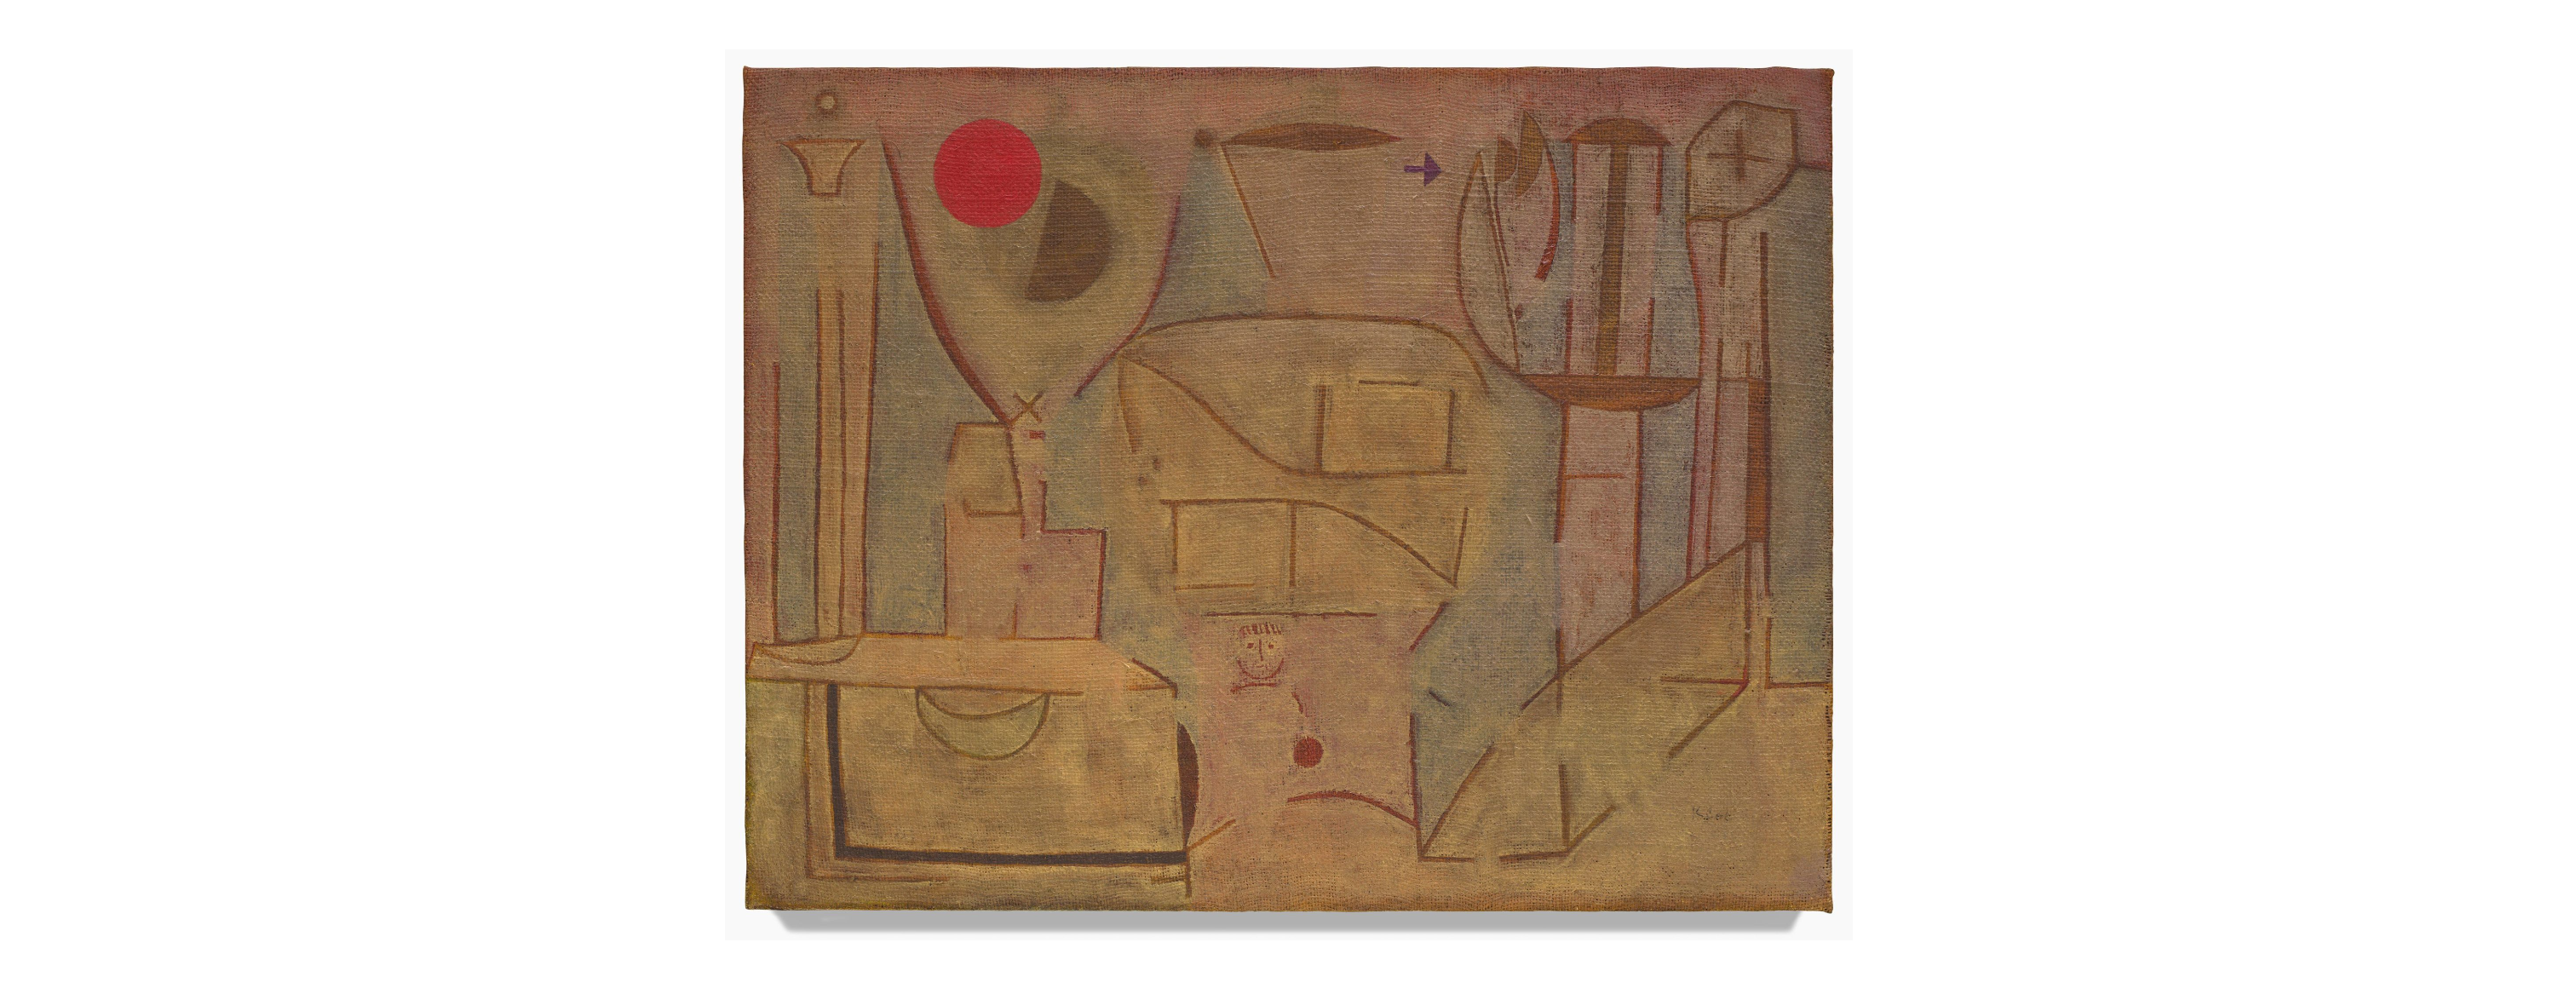 A painting by Paul Klee, titled "Fragmente (Fragments)," dated 1937